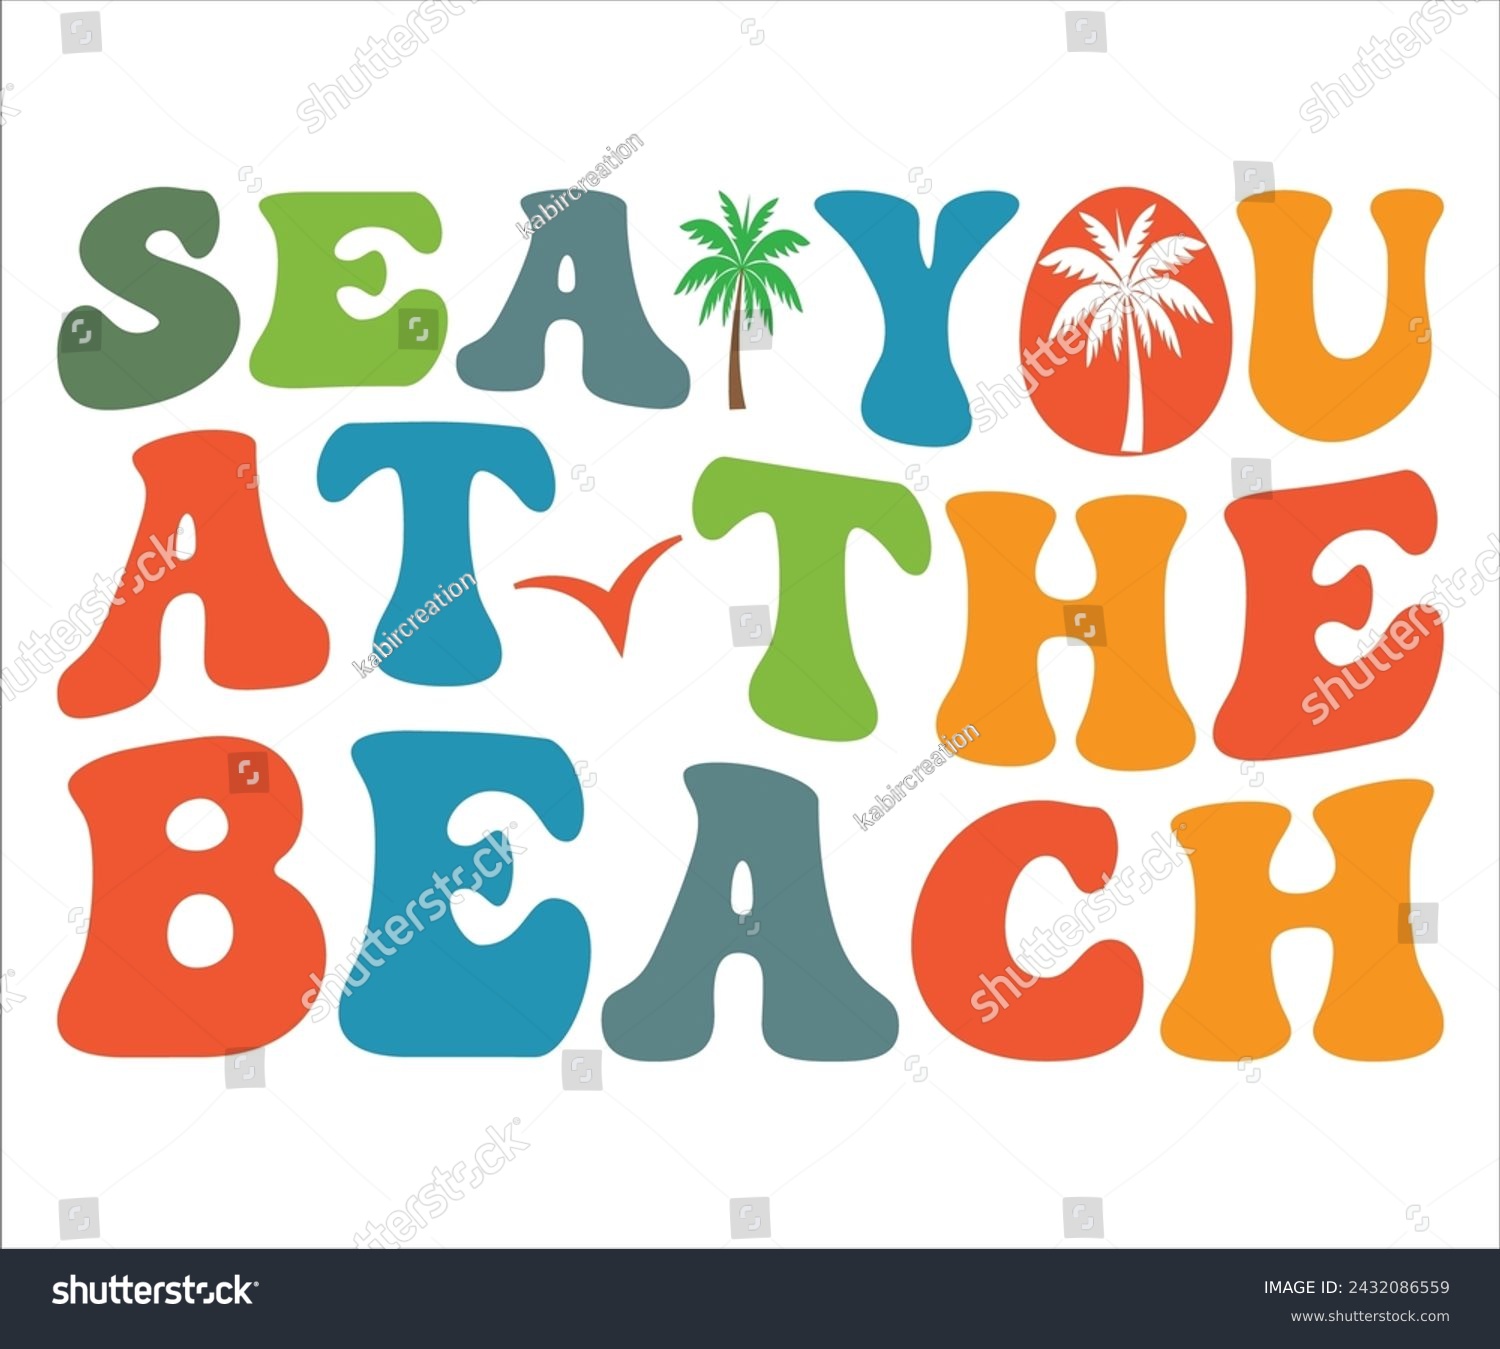 SVG of Sea You At The Beach T-shirt, Happy Summer Day T-shirt, Happy Summer Day Retro svg,Hello Summer Retro Svg,summer Beach Vibes Shirt, Vacation, Cut File for Cricut svg